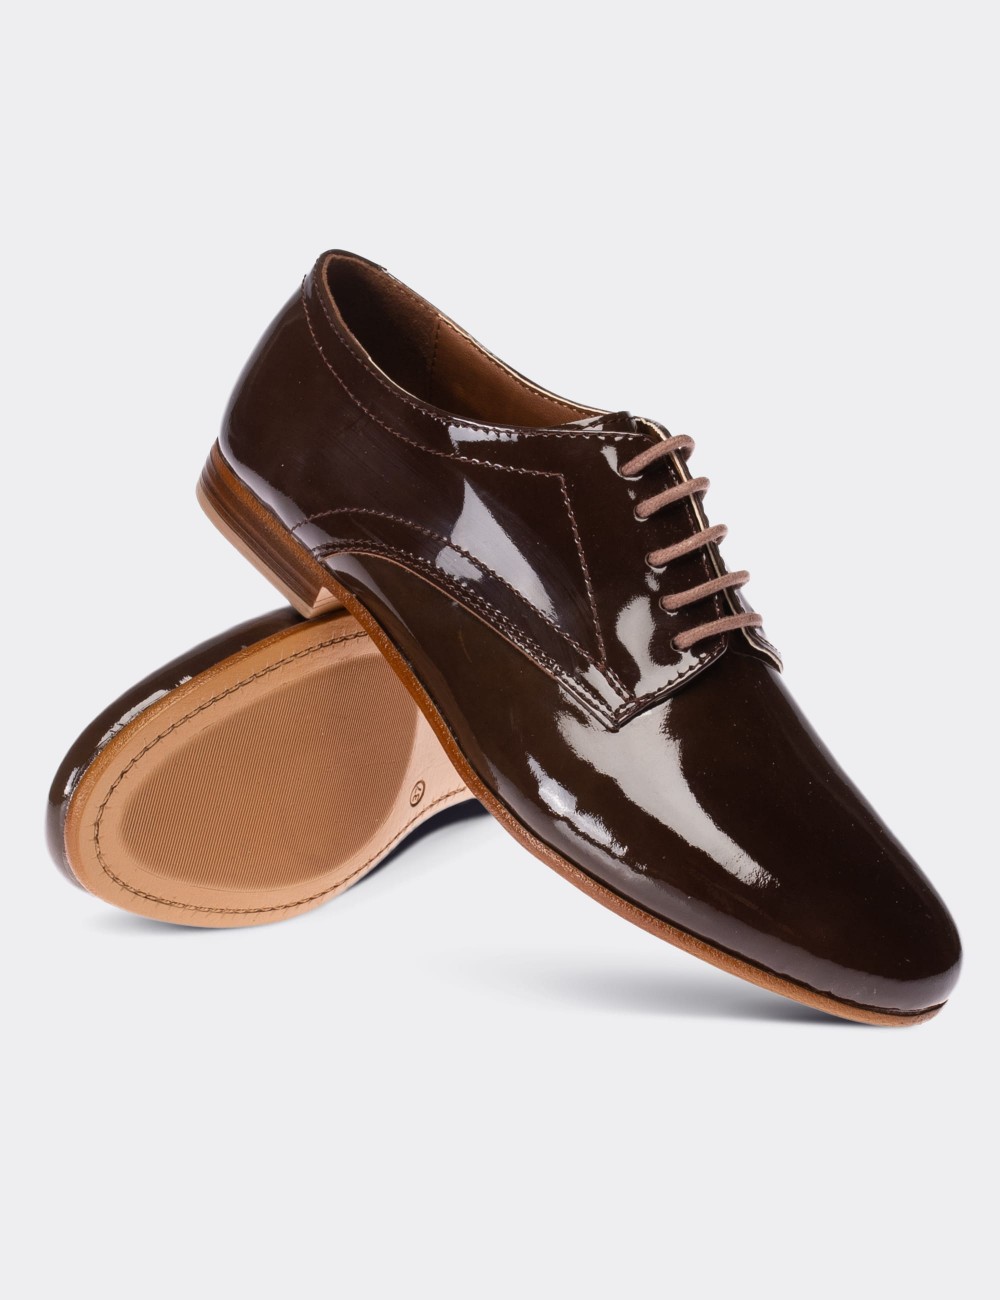 Brown Patent Leather Lace-up Shoes - 01430ZKHVC02